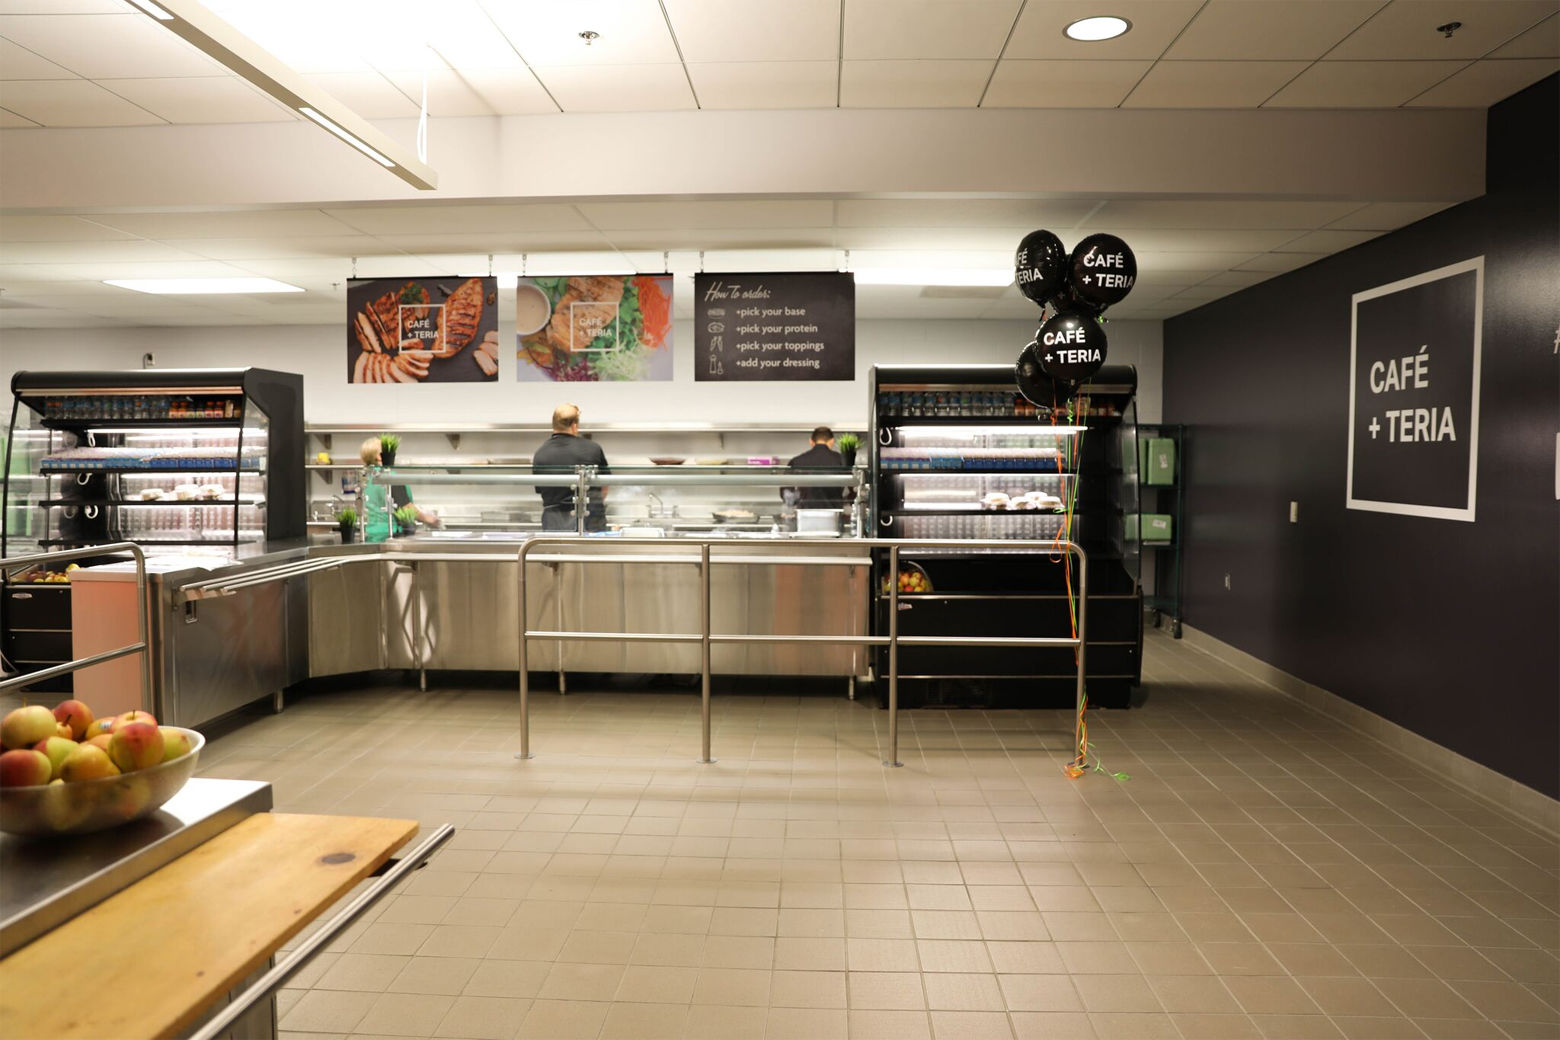 The Cafe + Teria line at Washington-Lee High School, one of three Northern Virginia high schools to pilot the new food option. (Courtesy Cuisine Solutions)